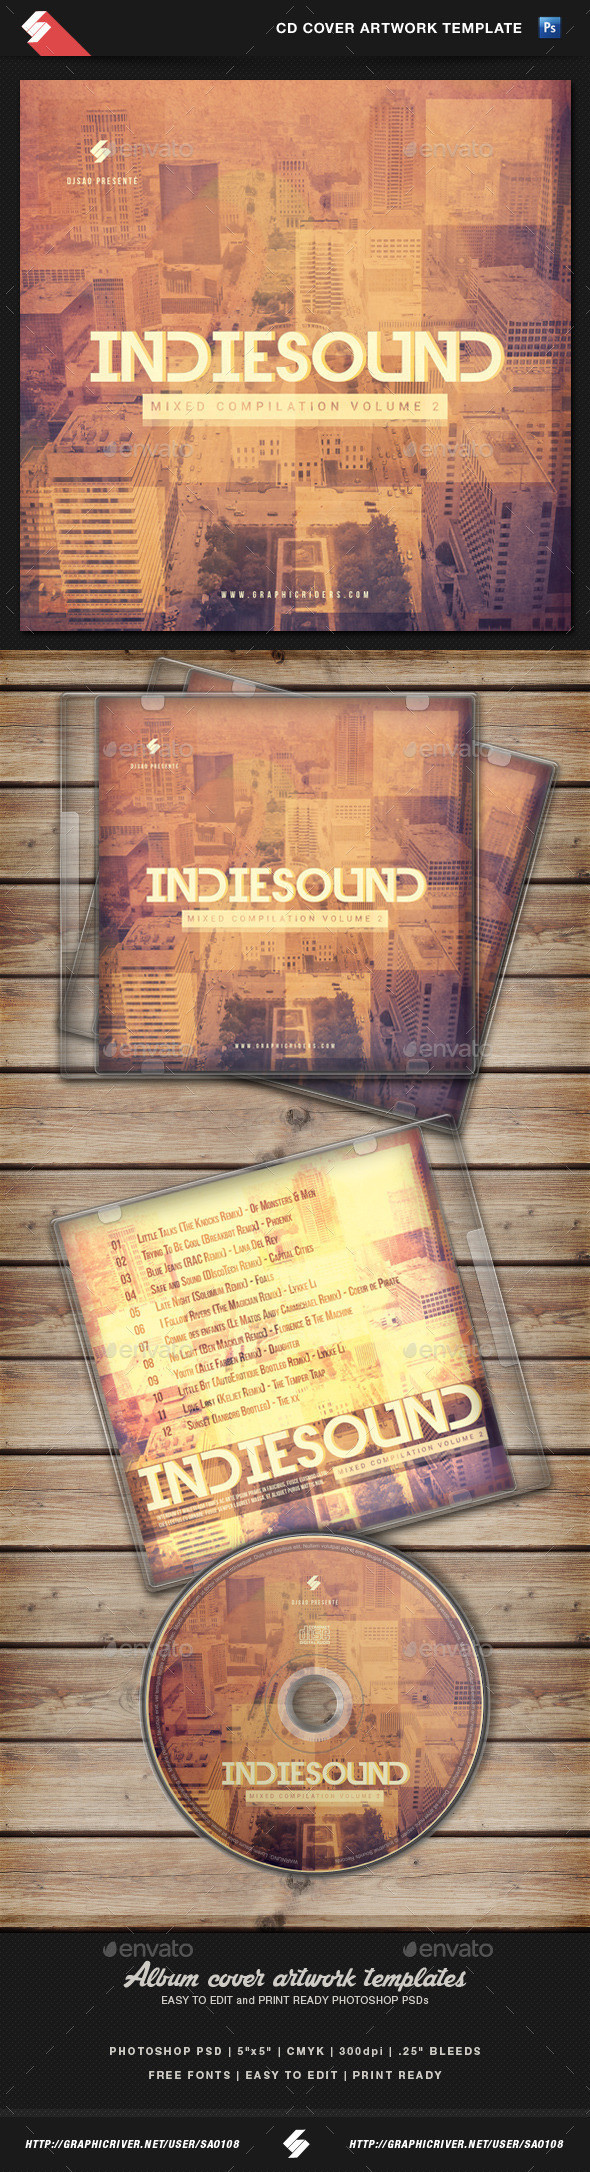 Indiesound02 cd cover template preview